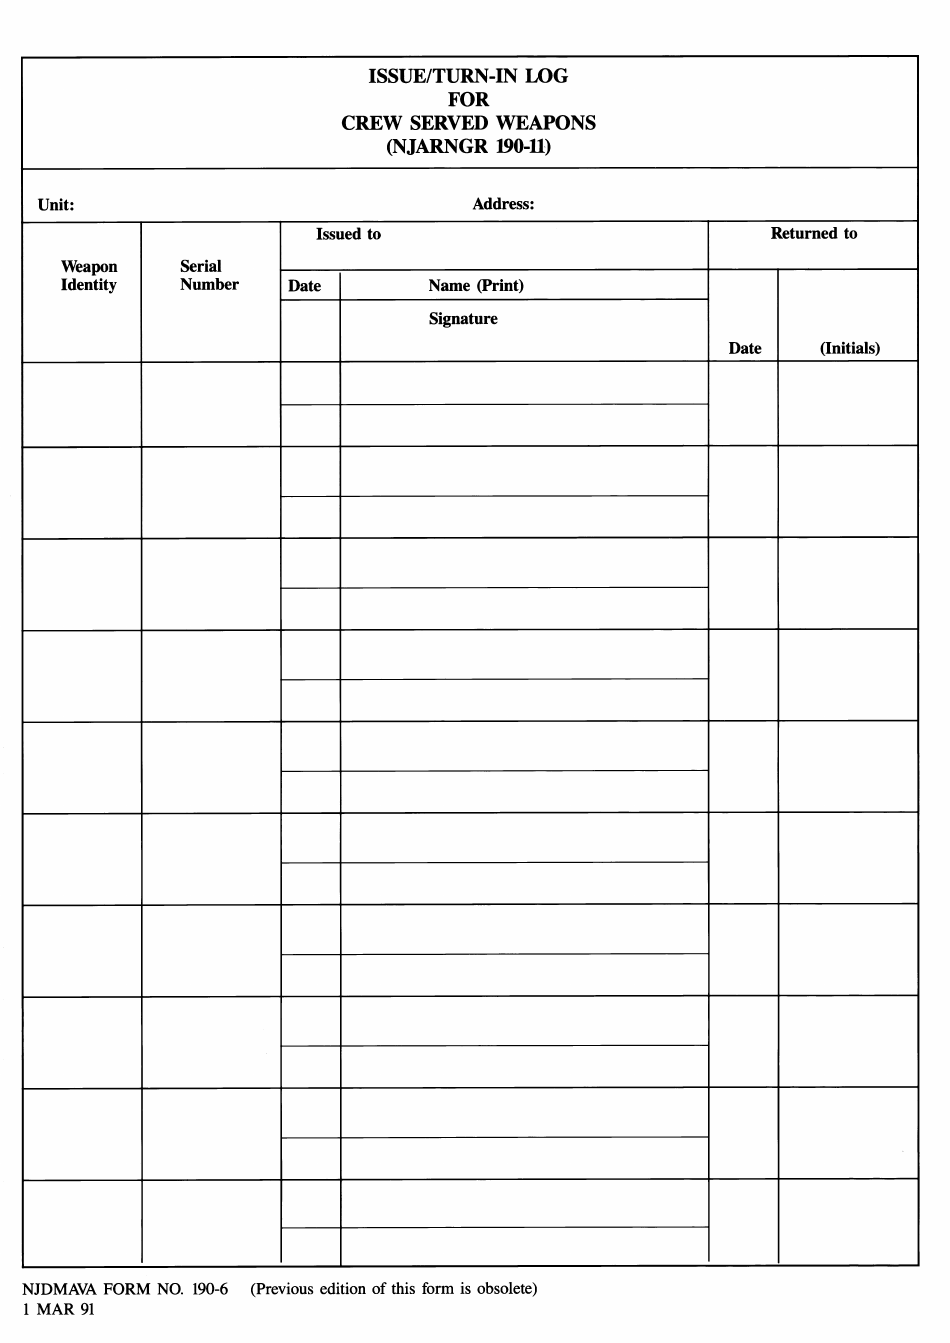 NJDMAVA Form 190-6 Issue / Turn-In Log for Crew Served Weapons - New Jersey, Page 1